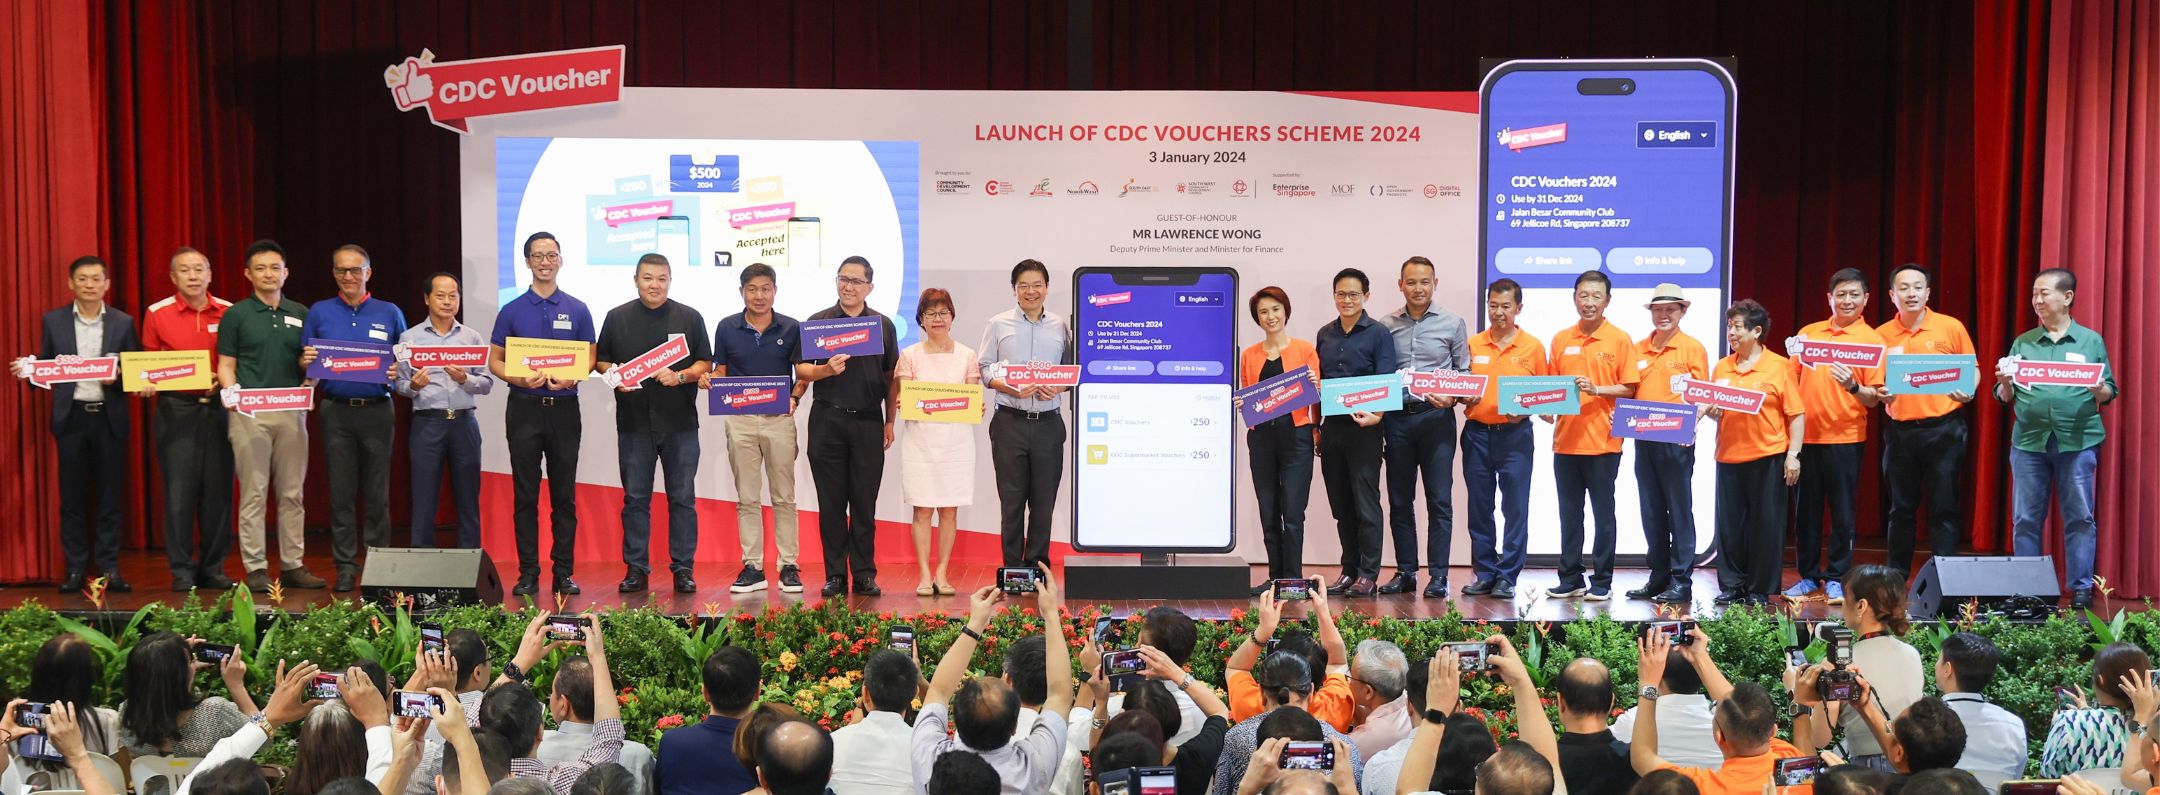 20240103 DPM Lawrence Wong at the Launch of the CDC Vouchers Scheme 2024_Hero jpg